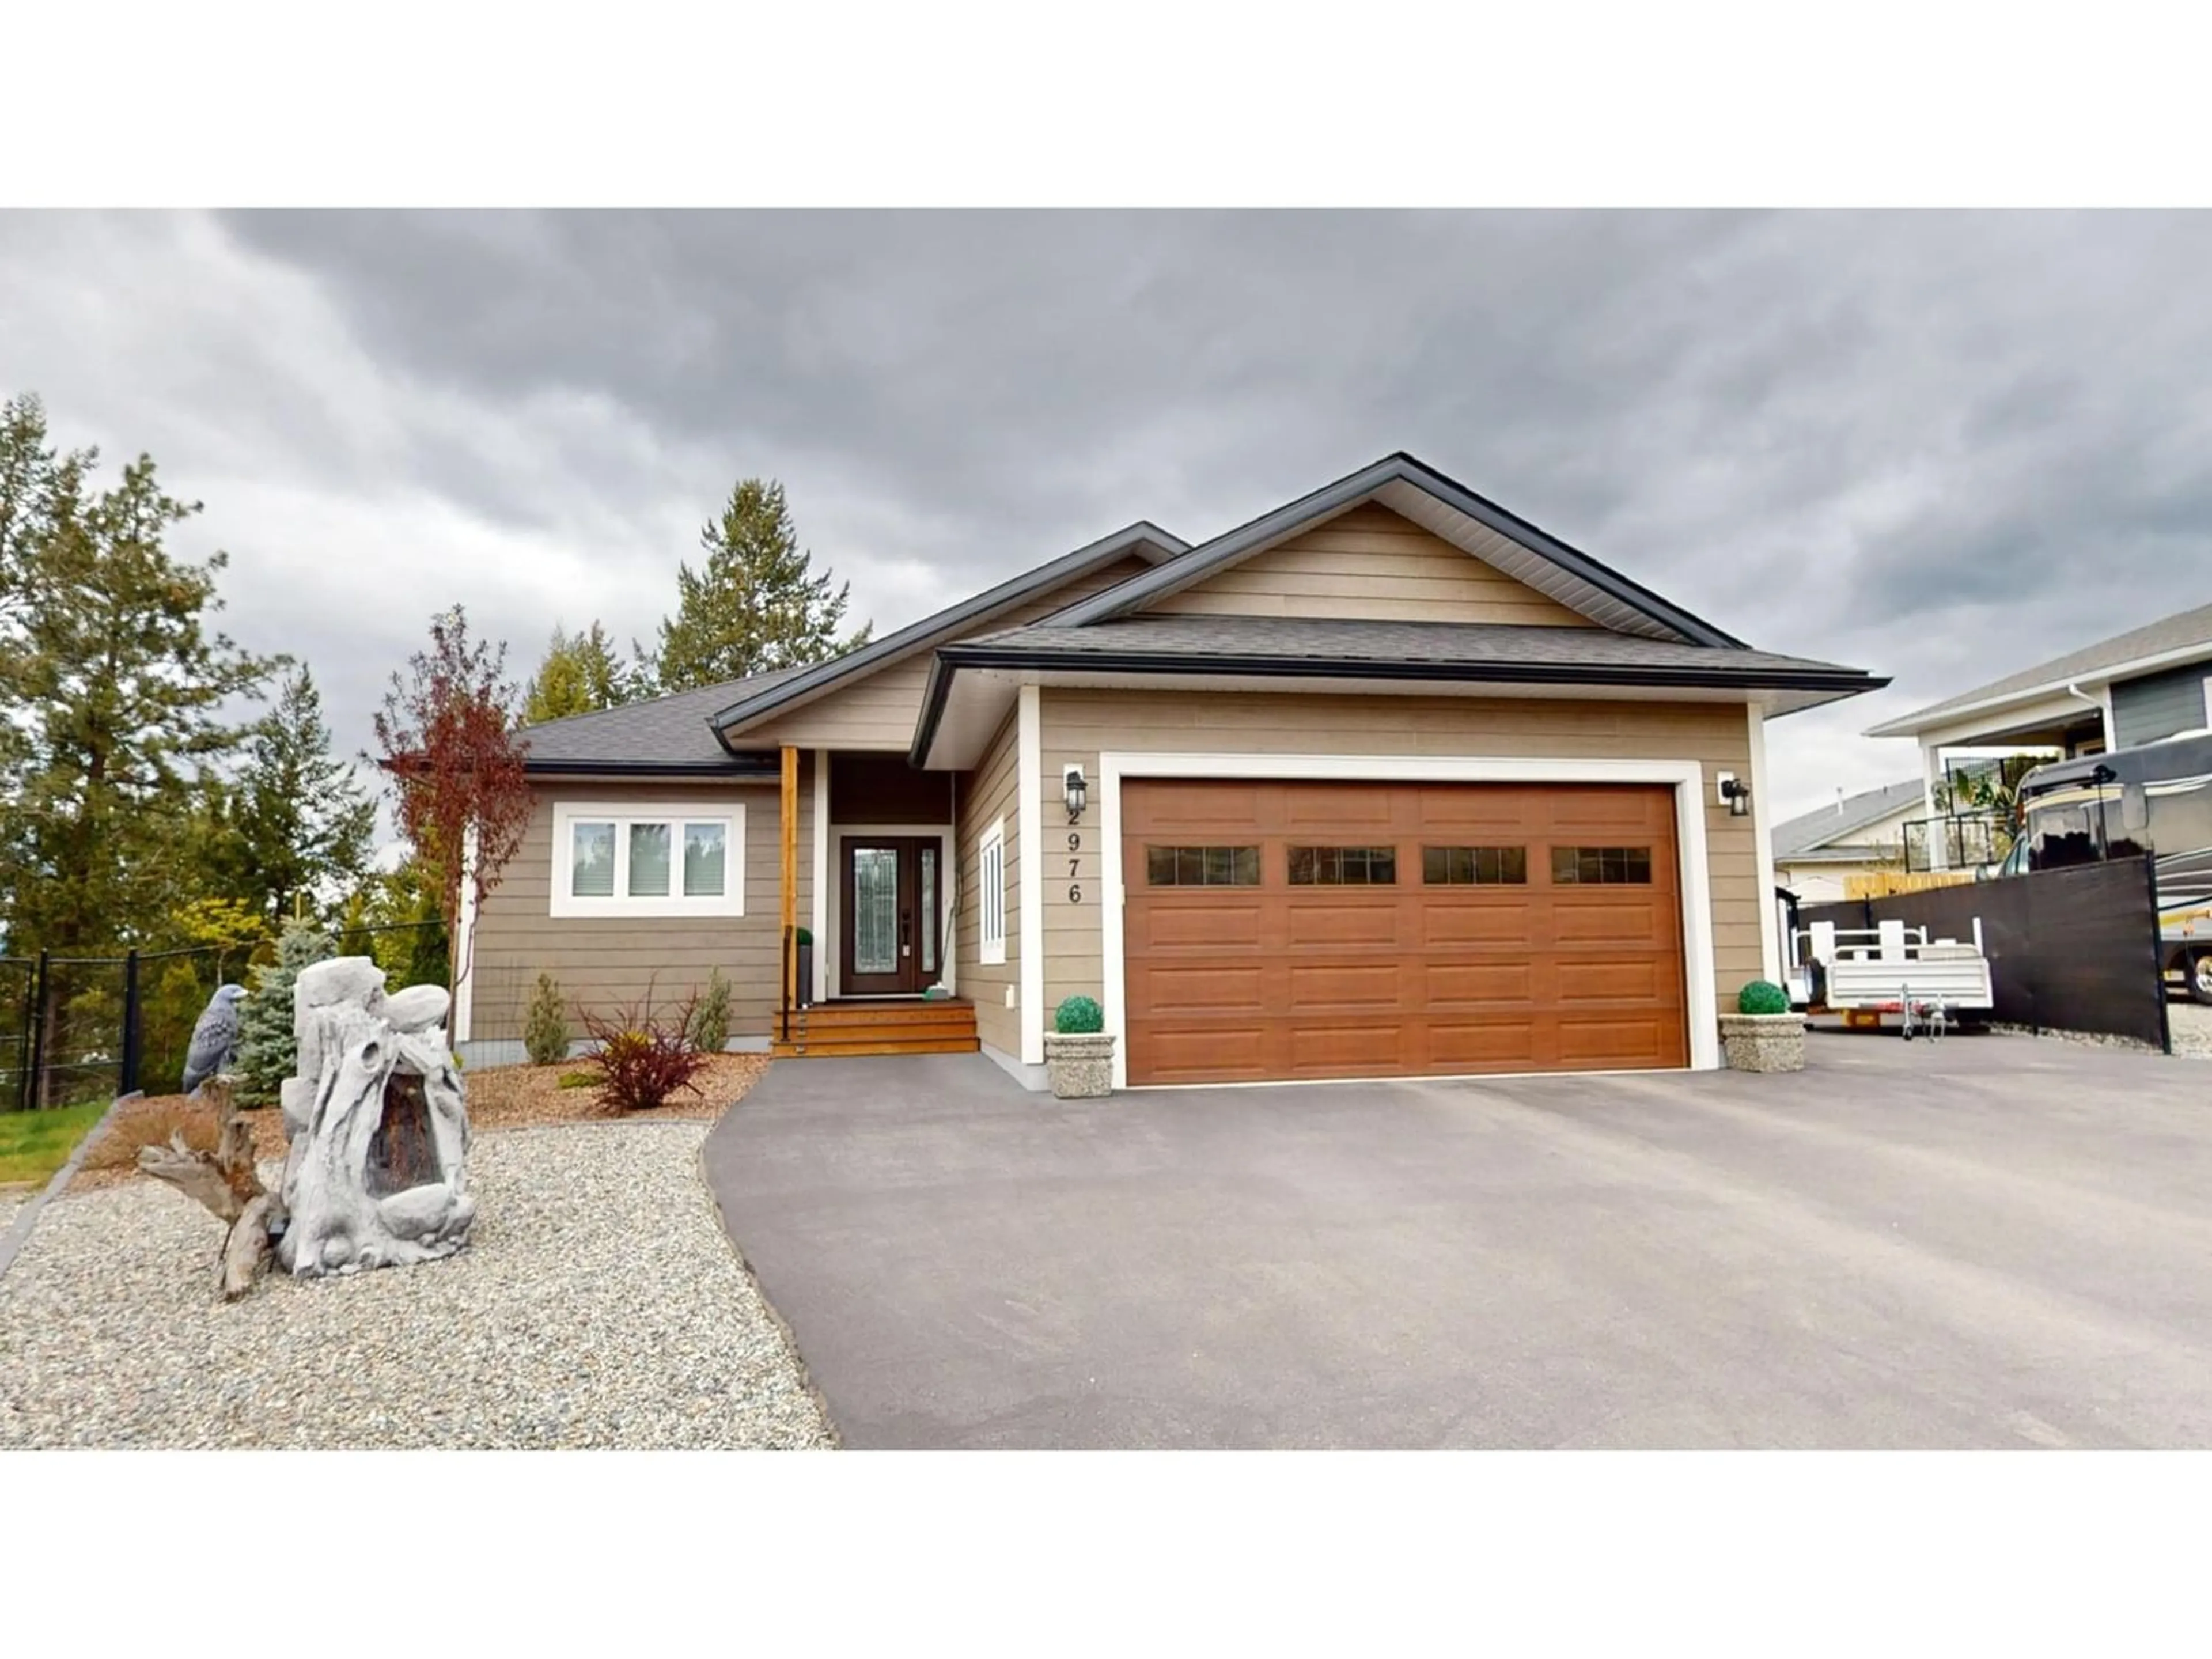 Home with vinyl exterior material for 2976 EAGLE RIDGE POINT N, Cranbrook British Columbia V1C6K9